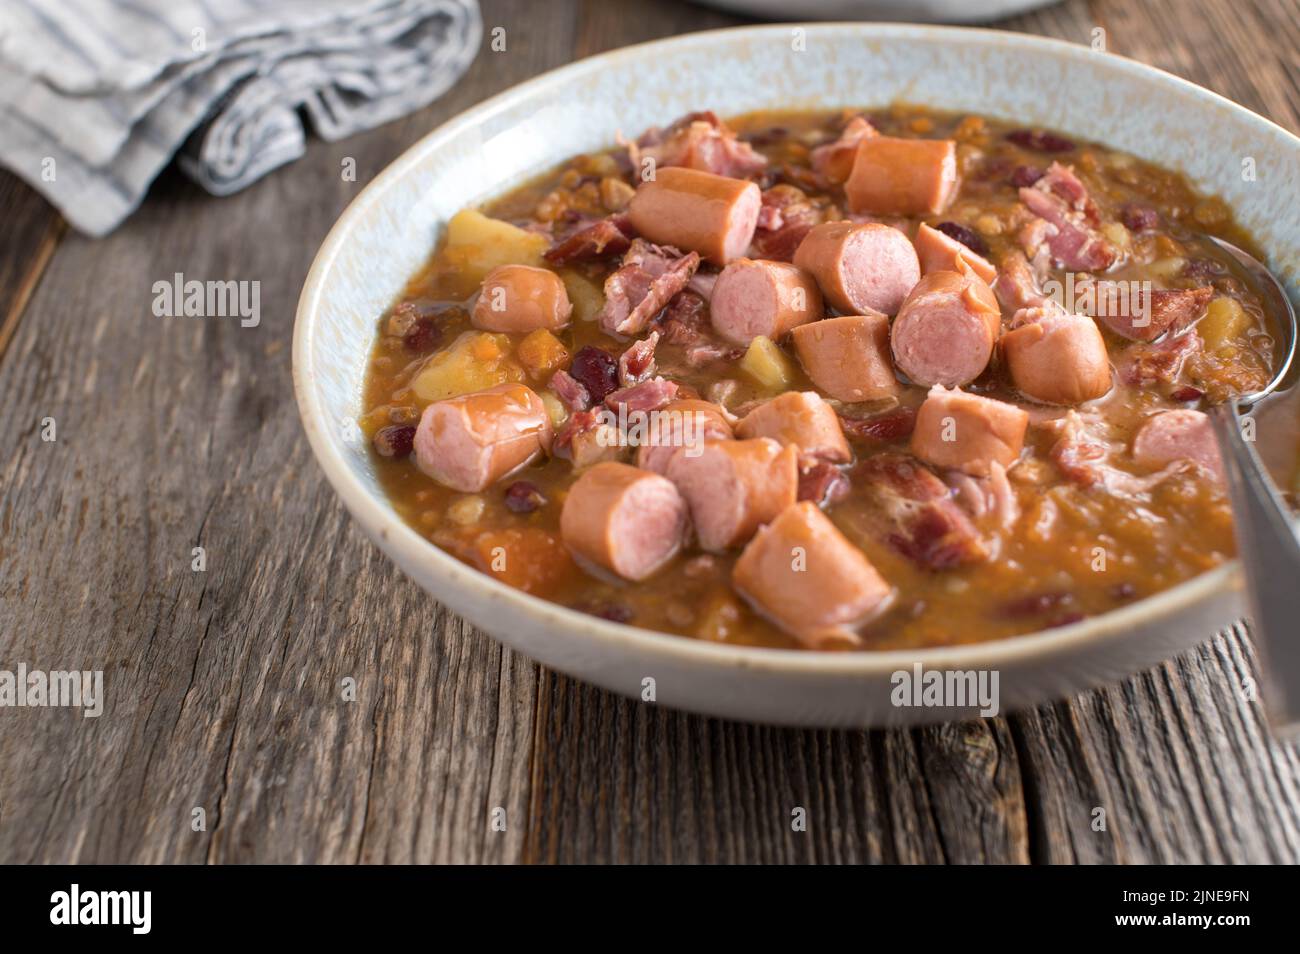 Savory meat stew with smoked pork, vienna sausage, potatoes and vegetables Stock Photo